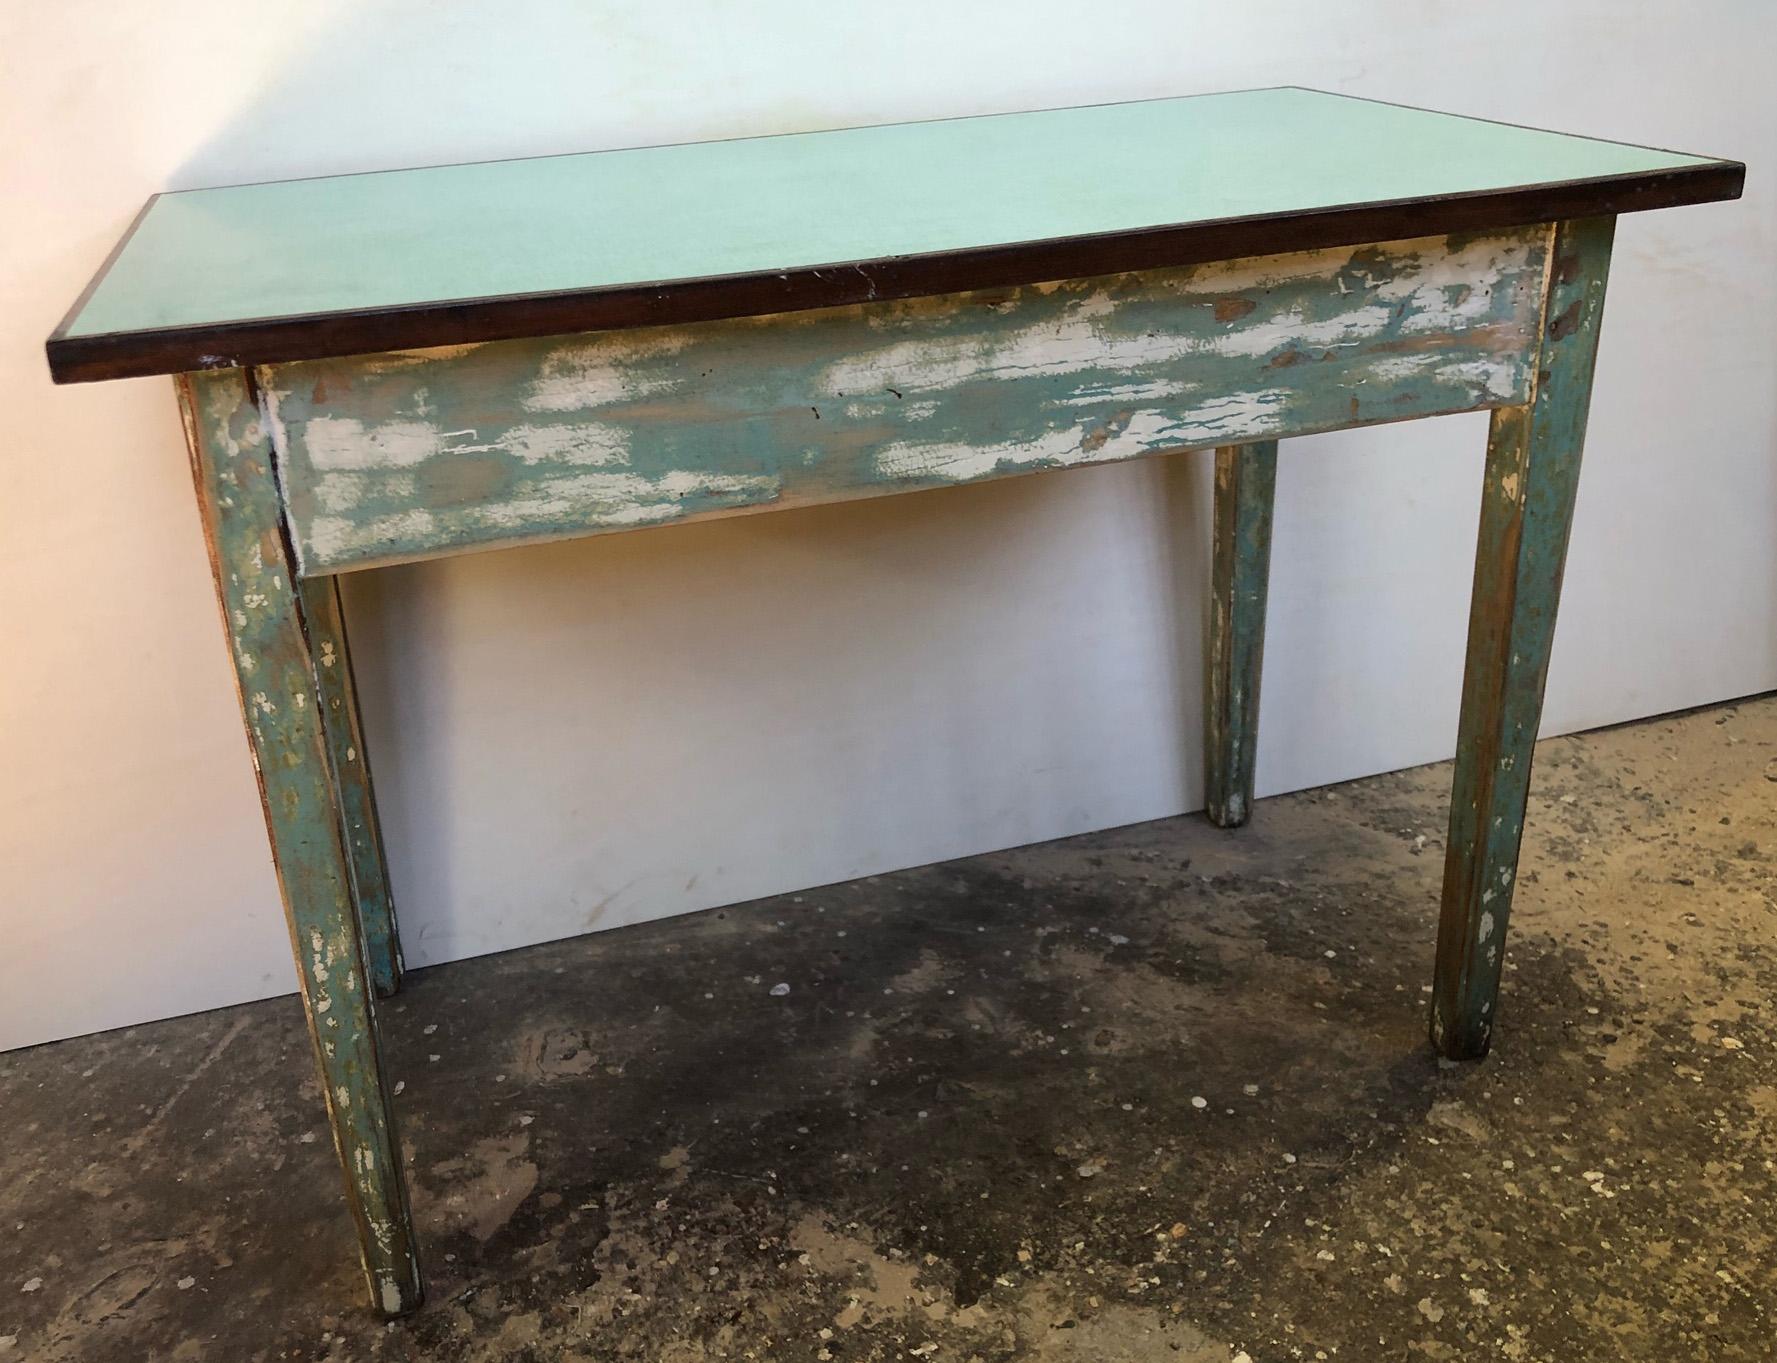 Table from 1950 Original Tuscan Green White Shaded, with Top in Formica on Fir 2